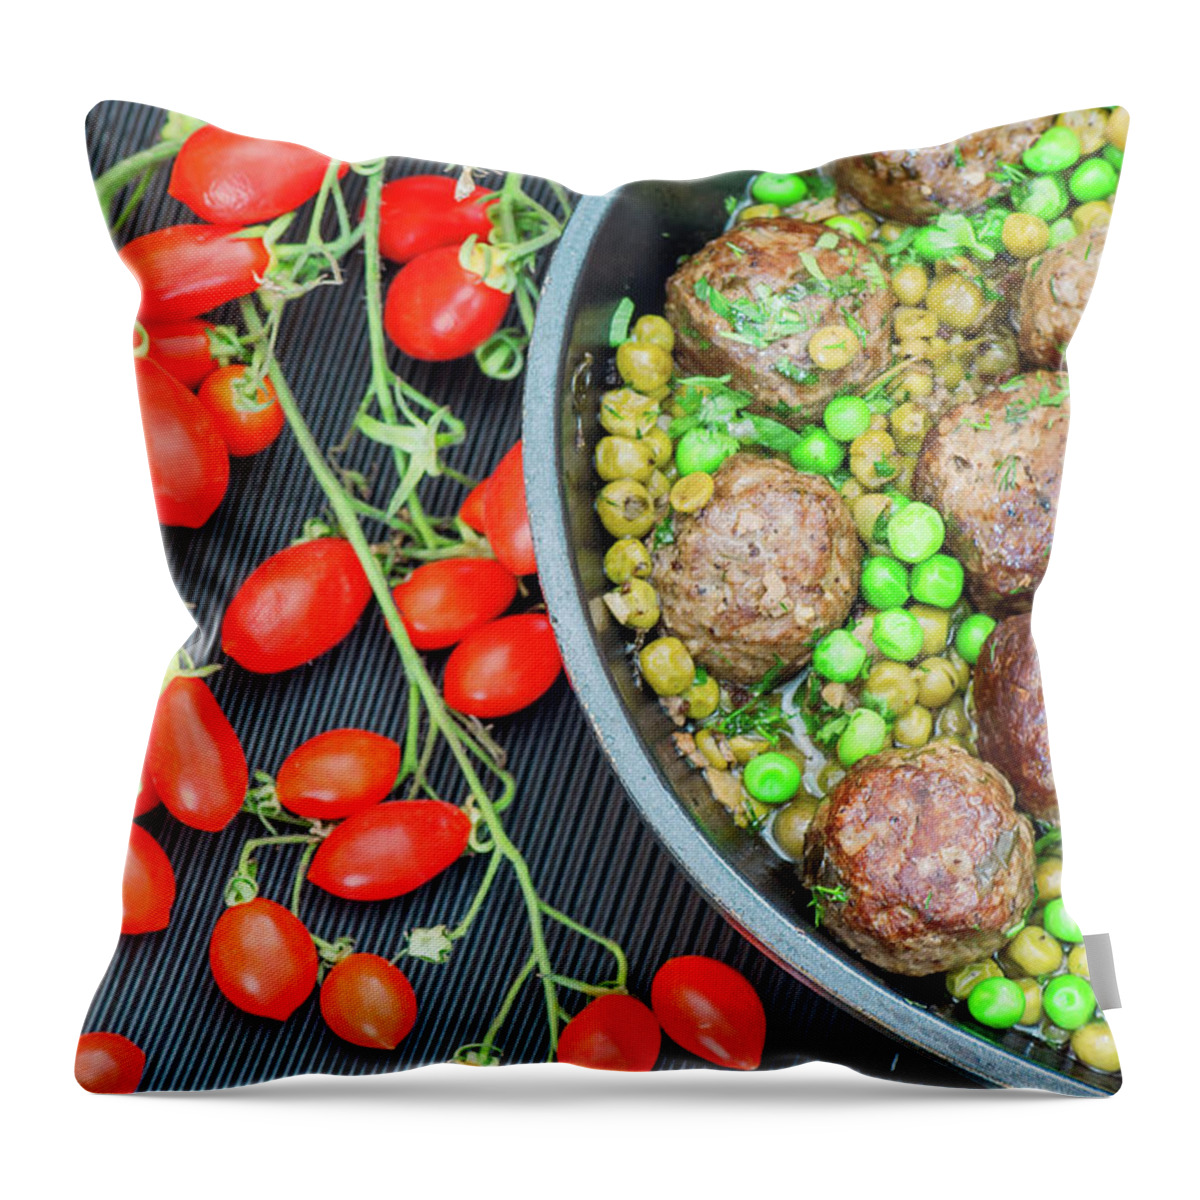 Meatball Throw Pillow featuring the photograph Beef Meatballs With Peas And Lemon by Olga Solan, The Art Photographer